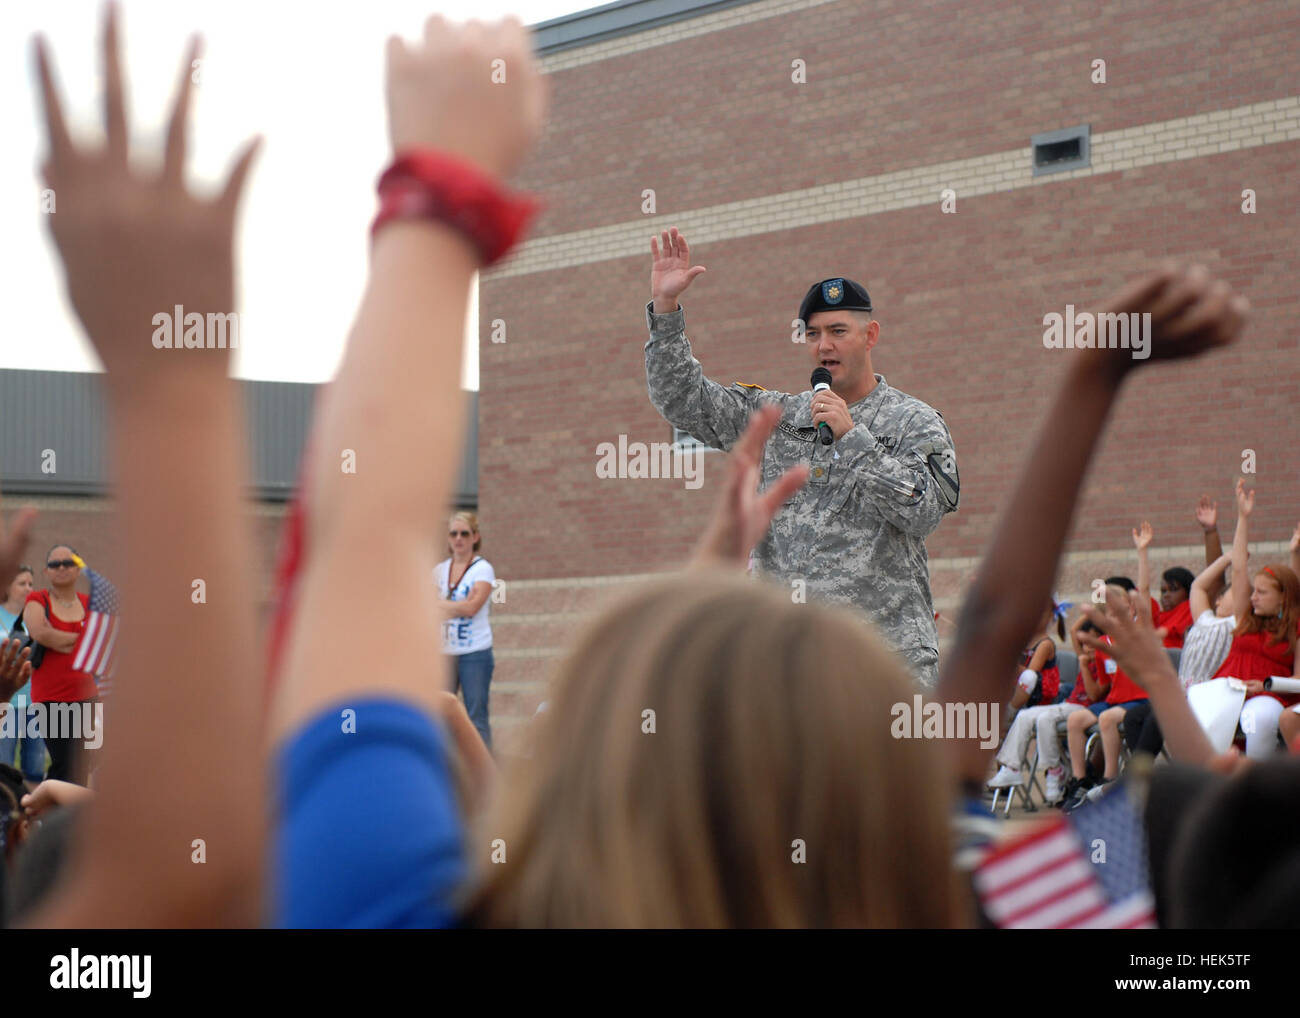 Maj. Dan Legereit, of Metropolis, Ill., the executive officer for 4th Attack Reconnaissance Battalion, 227th Aviation Regiment, 1st Air Cavalry Brigade, 1st Cavalry Division, asks students at Trimmier Elementary School what freedom means to them. Legereit, along with nearly 40 soldiers from 4-227th, visited the school to help the children and faculty memorialize the events of 9/11, Sept. 10. 1st Air Cav, kids celebrate freedom 318596 Stock Photo